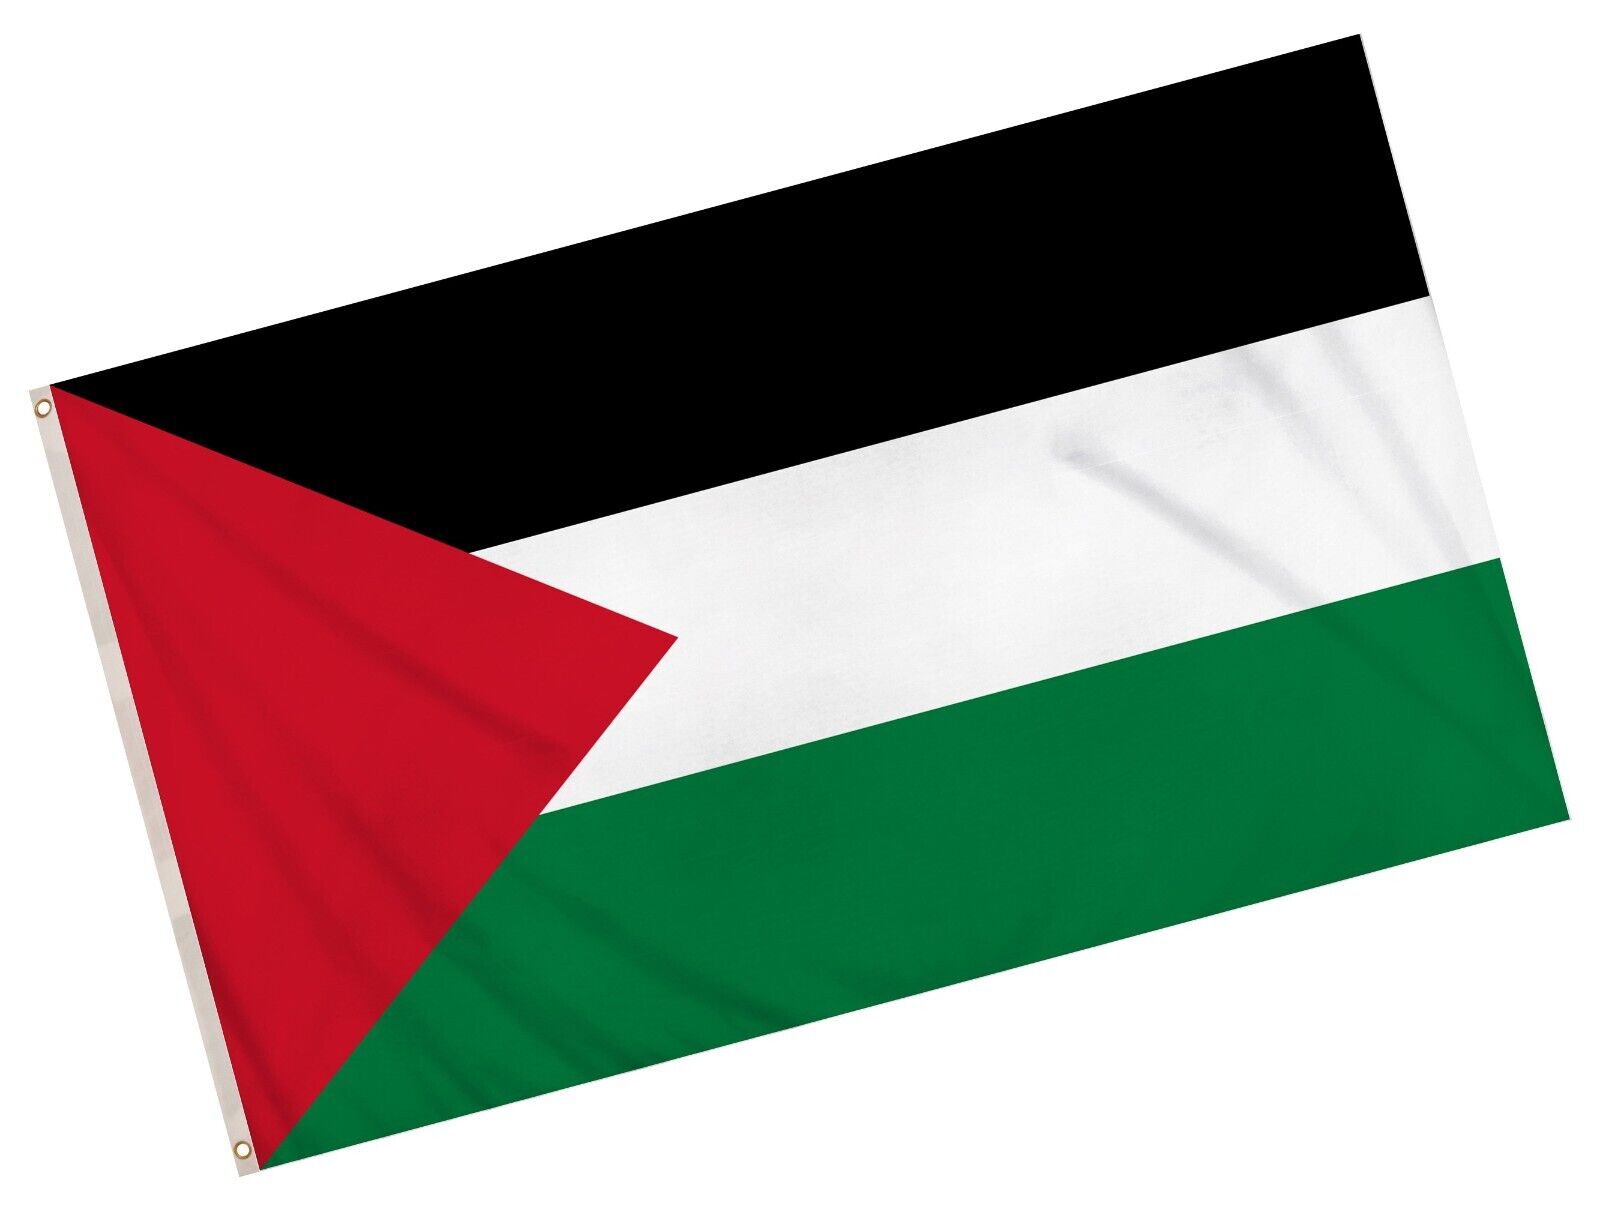 PALESTINE FLAG LARGE 5FT x 3FT DOUBLE STITCHED NATIONAL BANNER WITH EYELETS